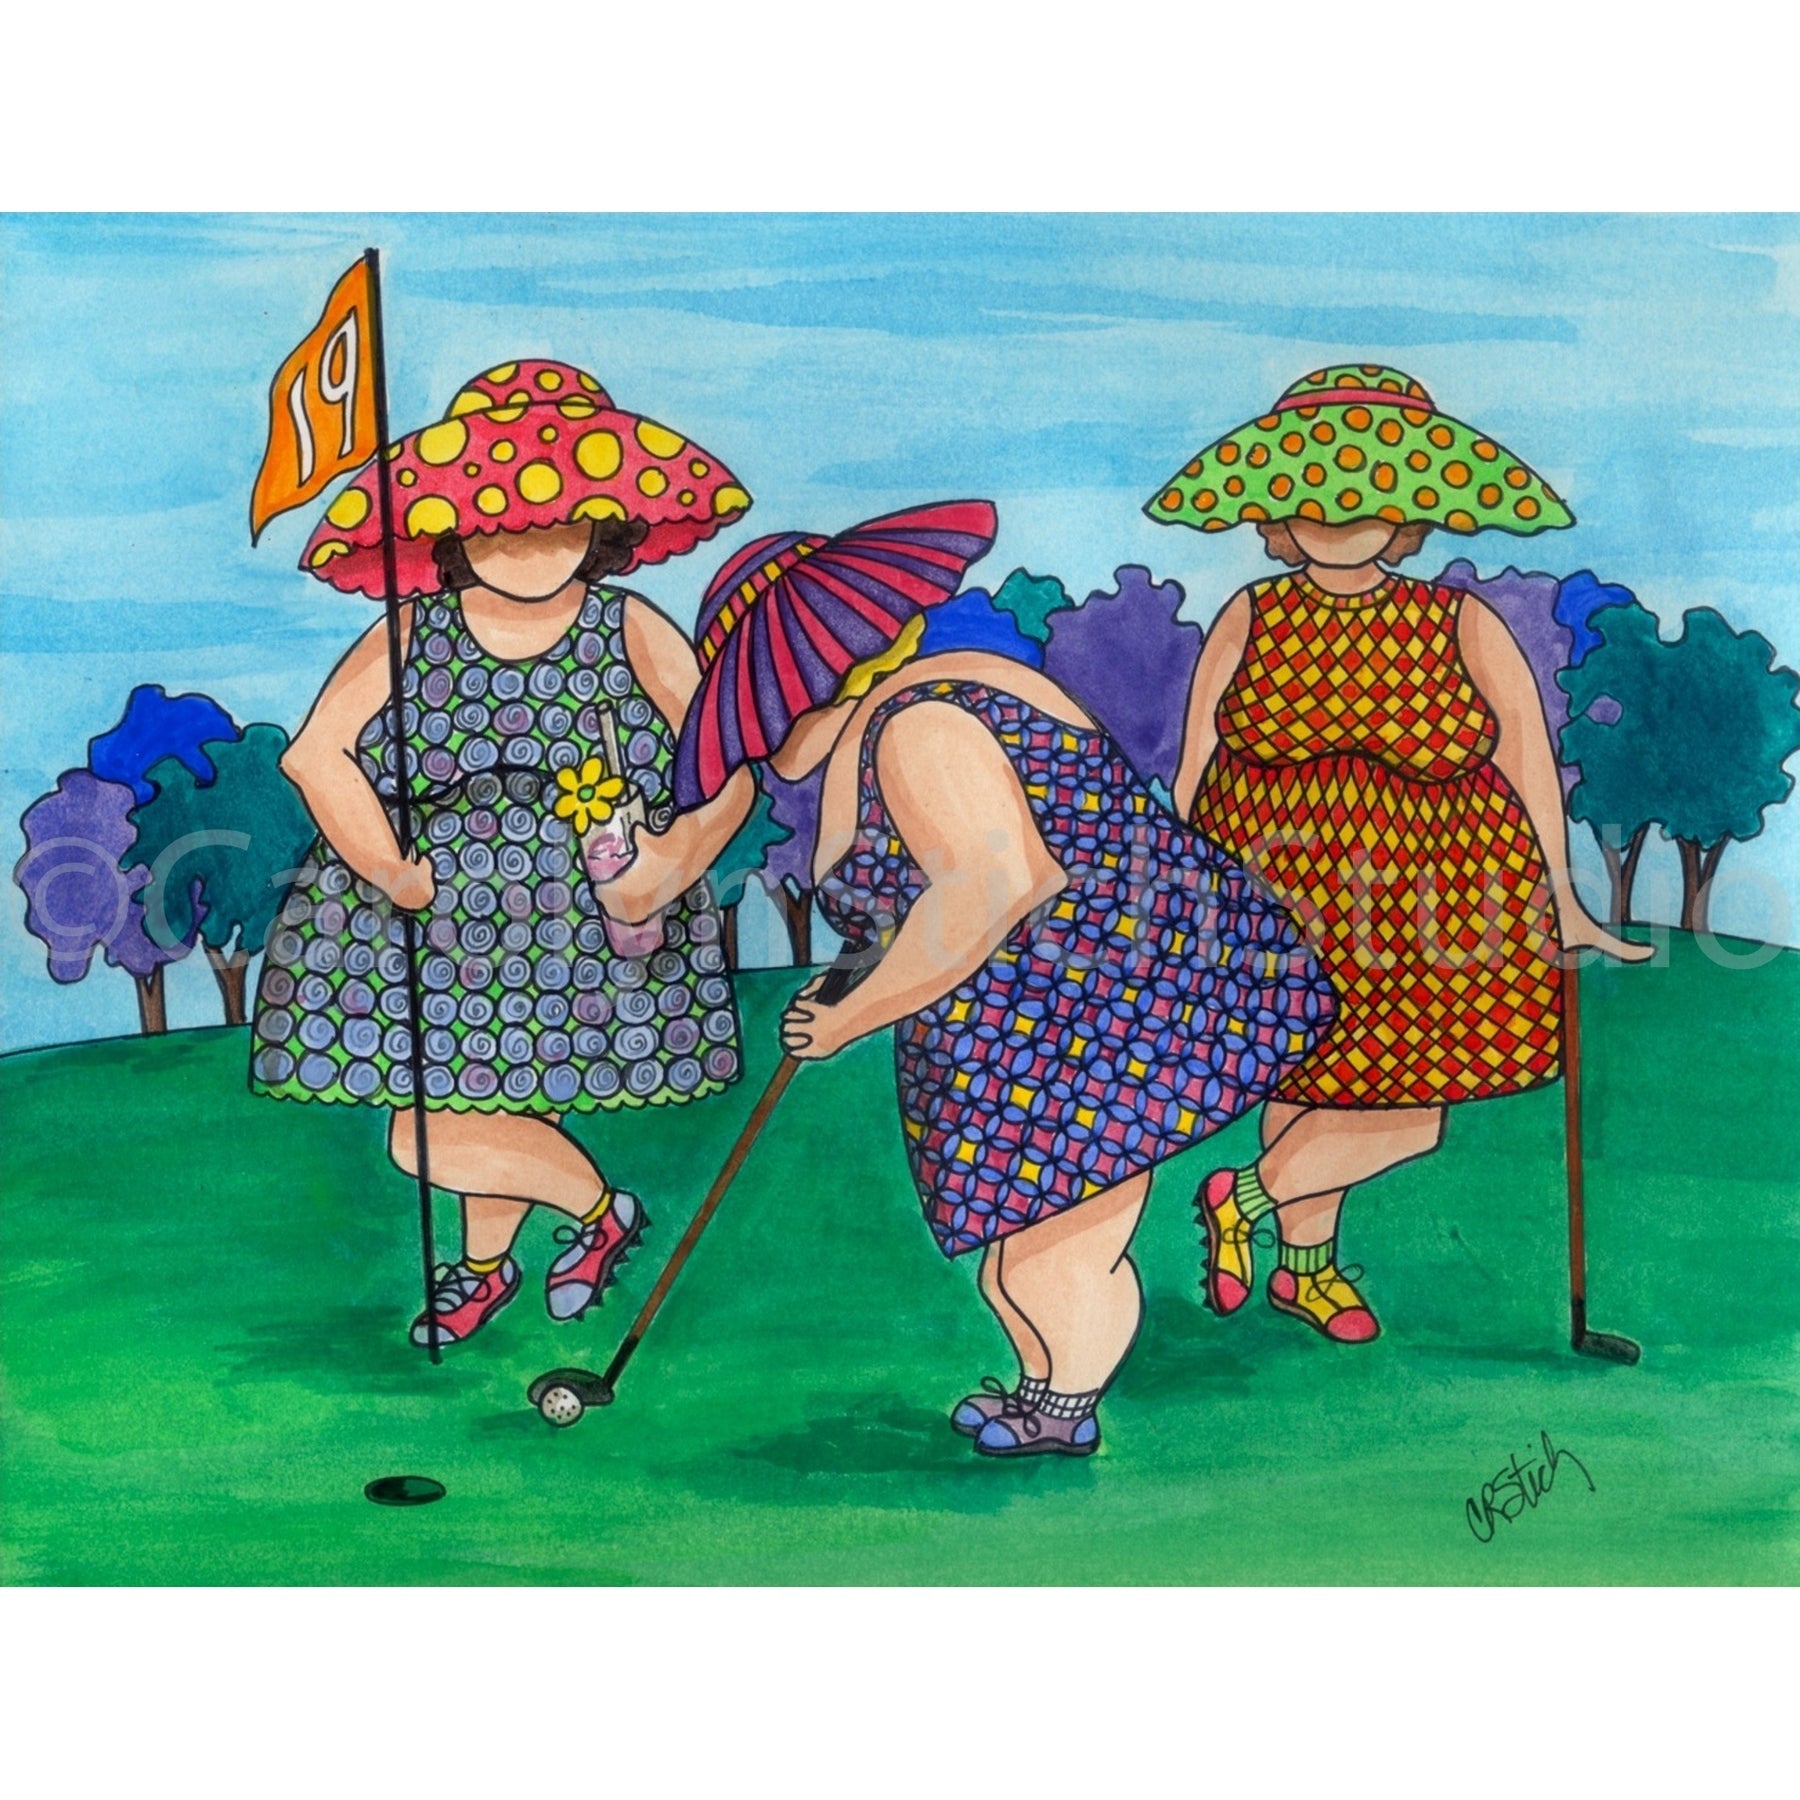 The Girls on the Green, rug hooking pattern